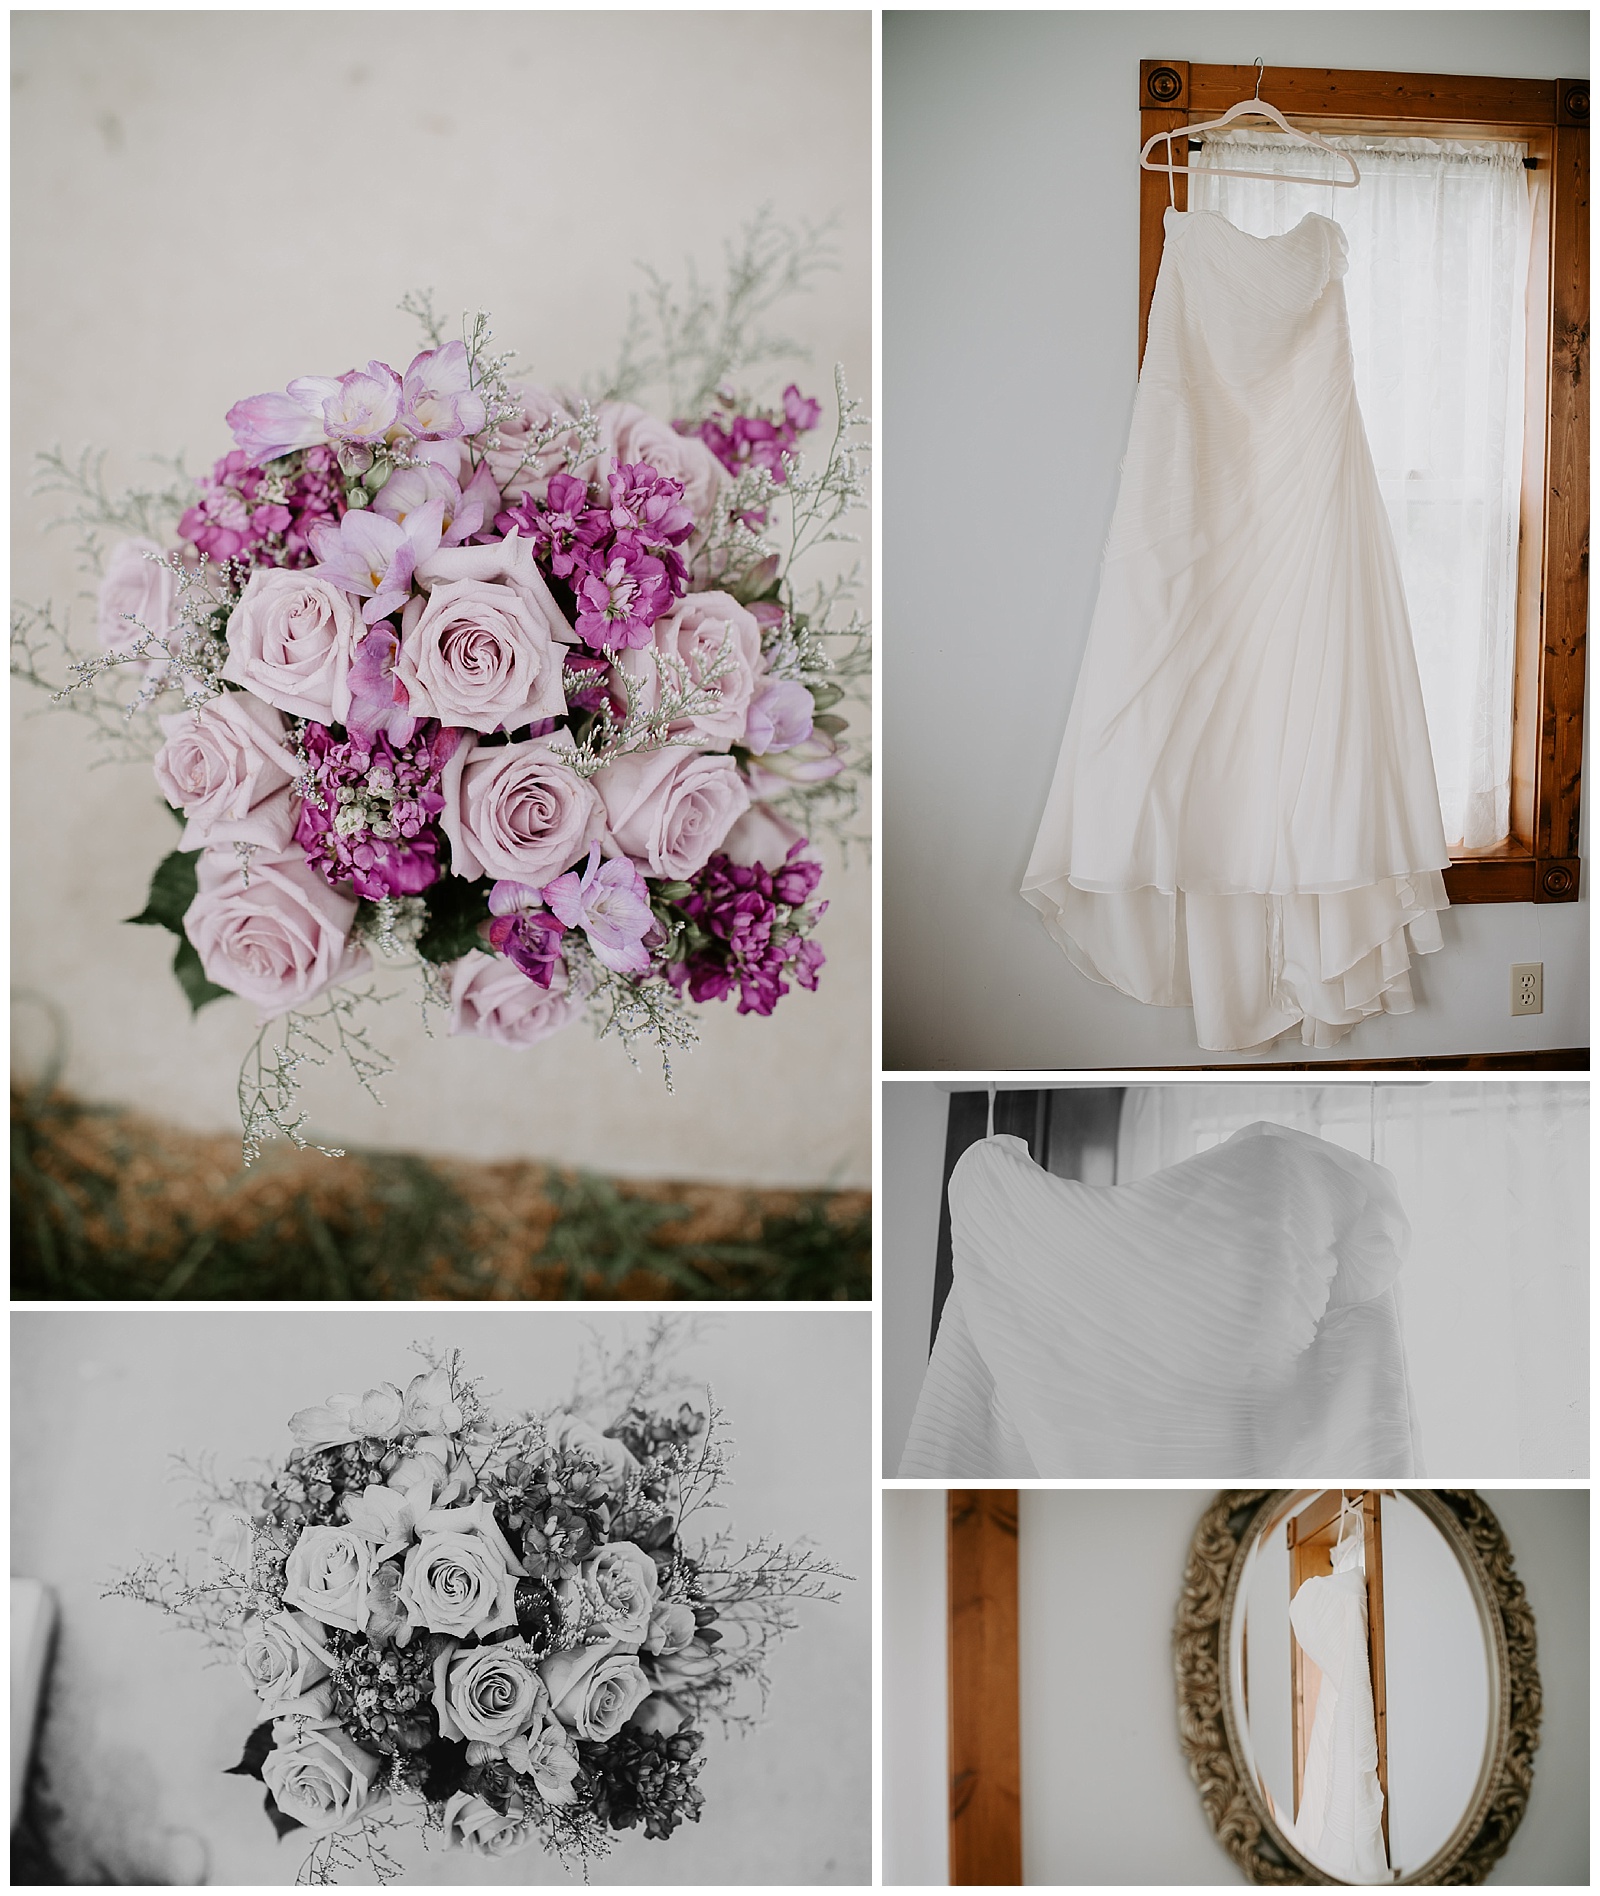 wedding dress hung in front of the window, purple roses and baby's breath in a wedding bridal bouquet